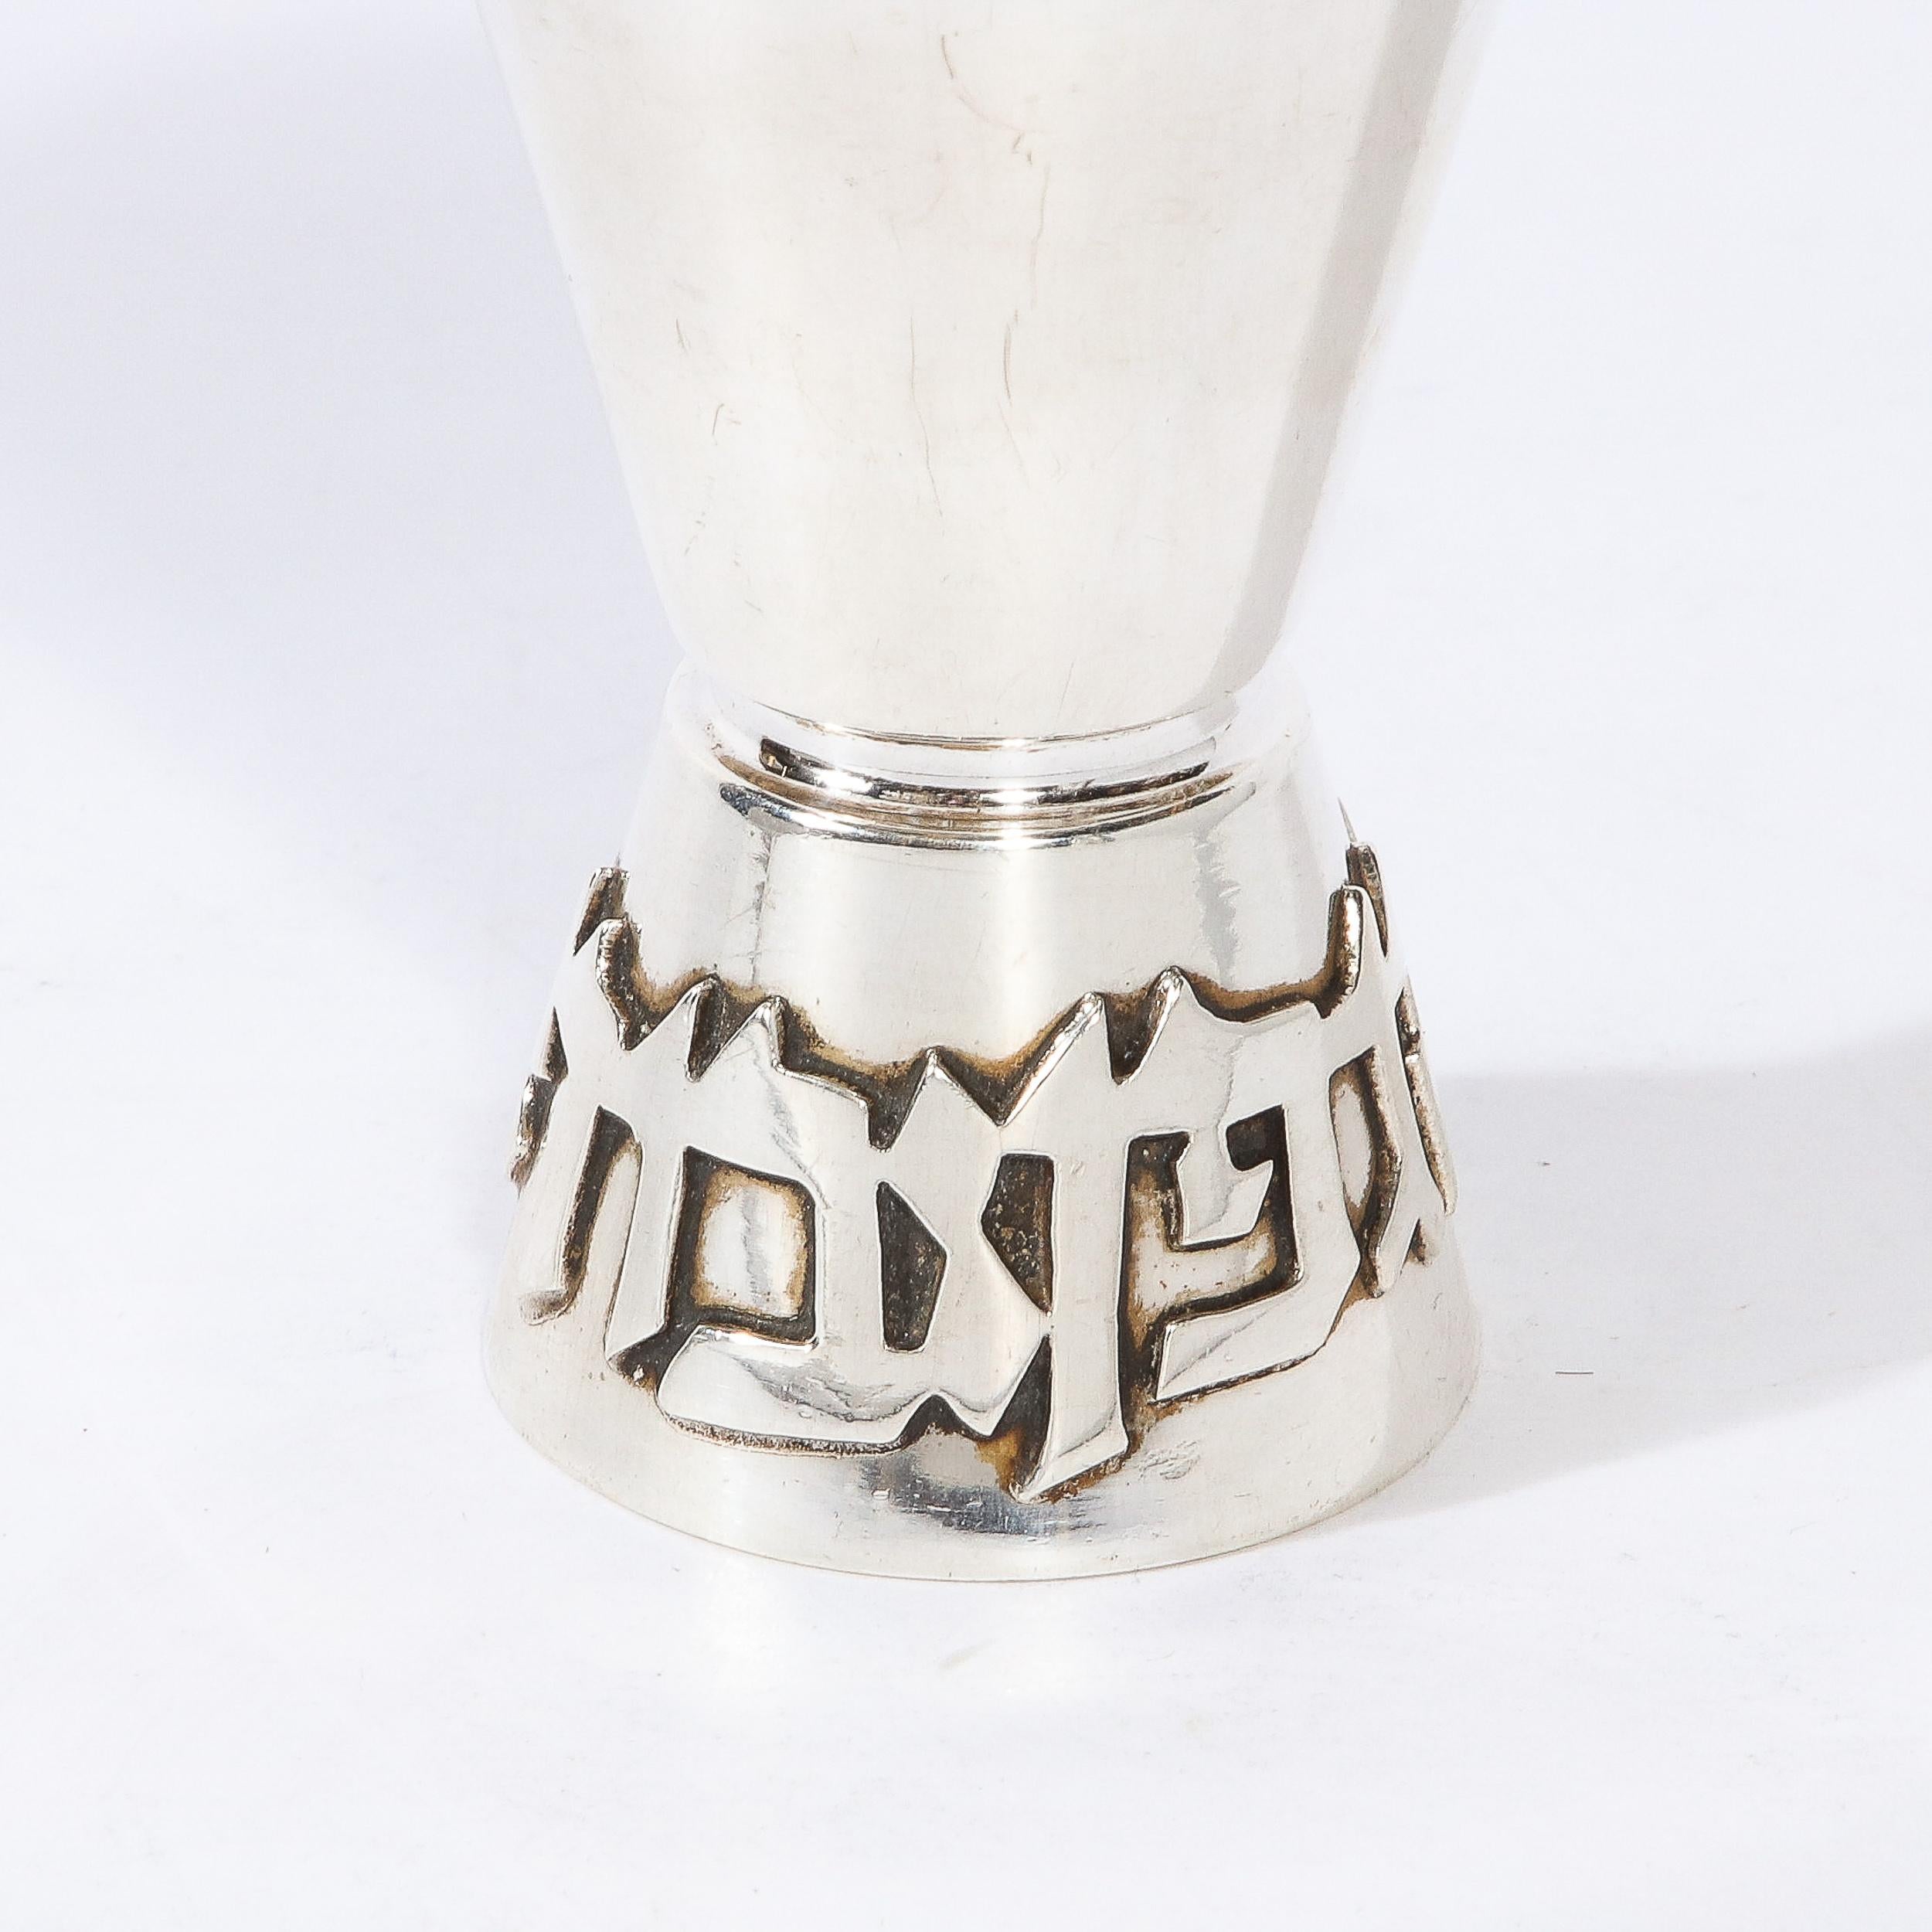 This charming Sterling Silver Kiddish Cup with Hebrew Lettered Base is by Ludwig Holpert and originates from the United States, Circa 1970. Featuring a tapered form and beautifully scaled proportions, the base is inscribed with a Hebrew blessing